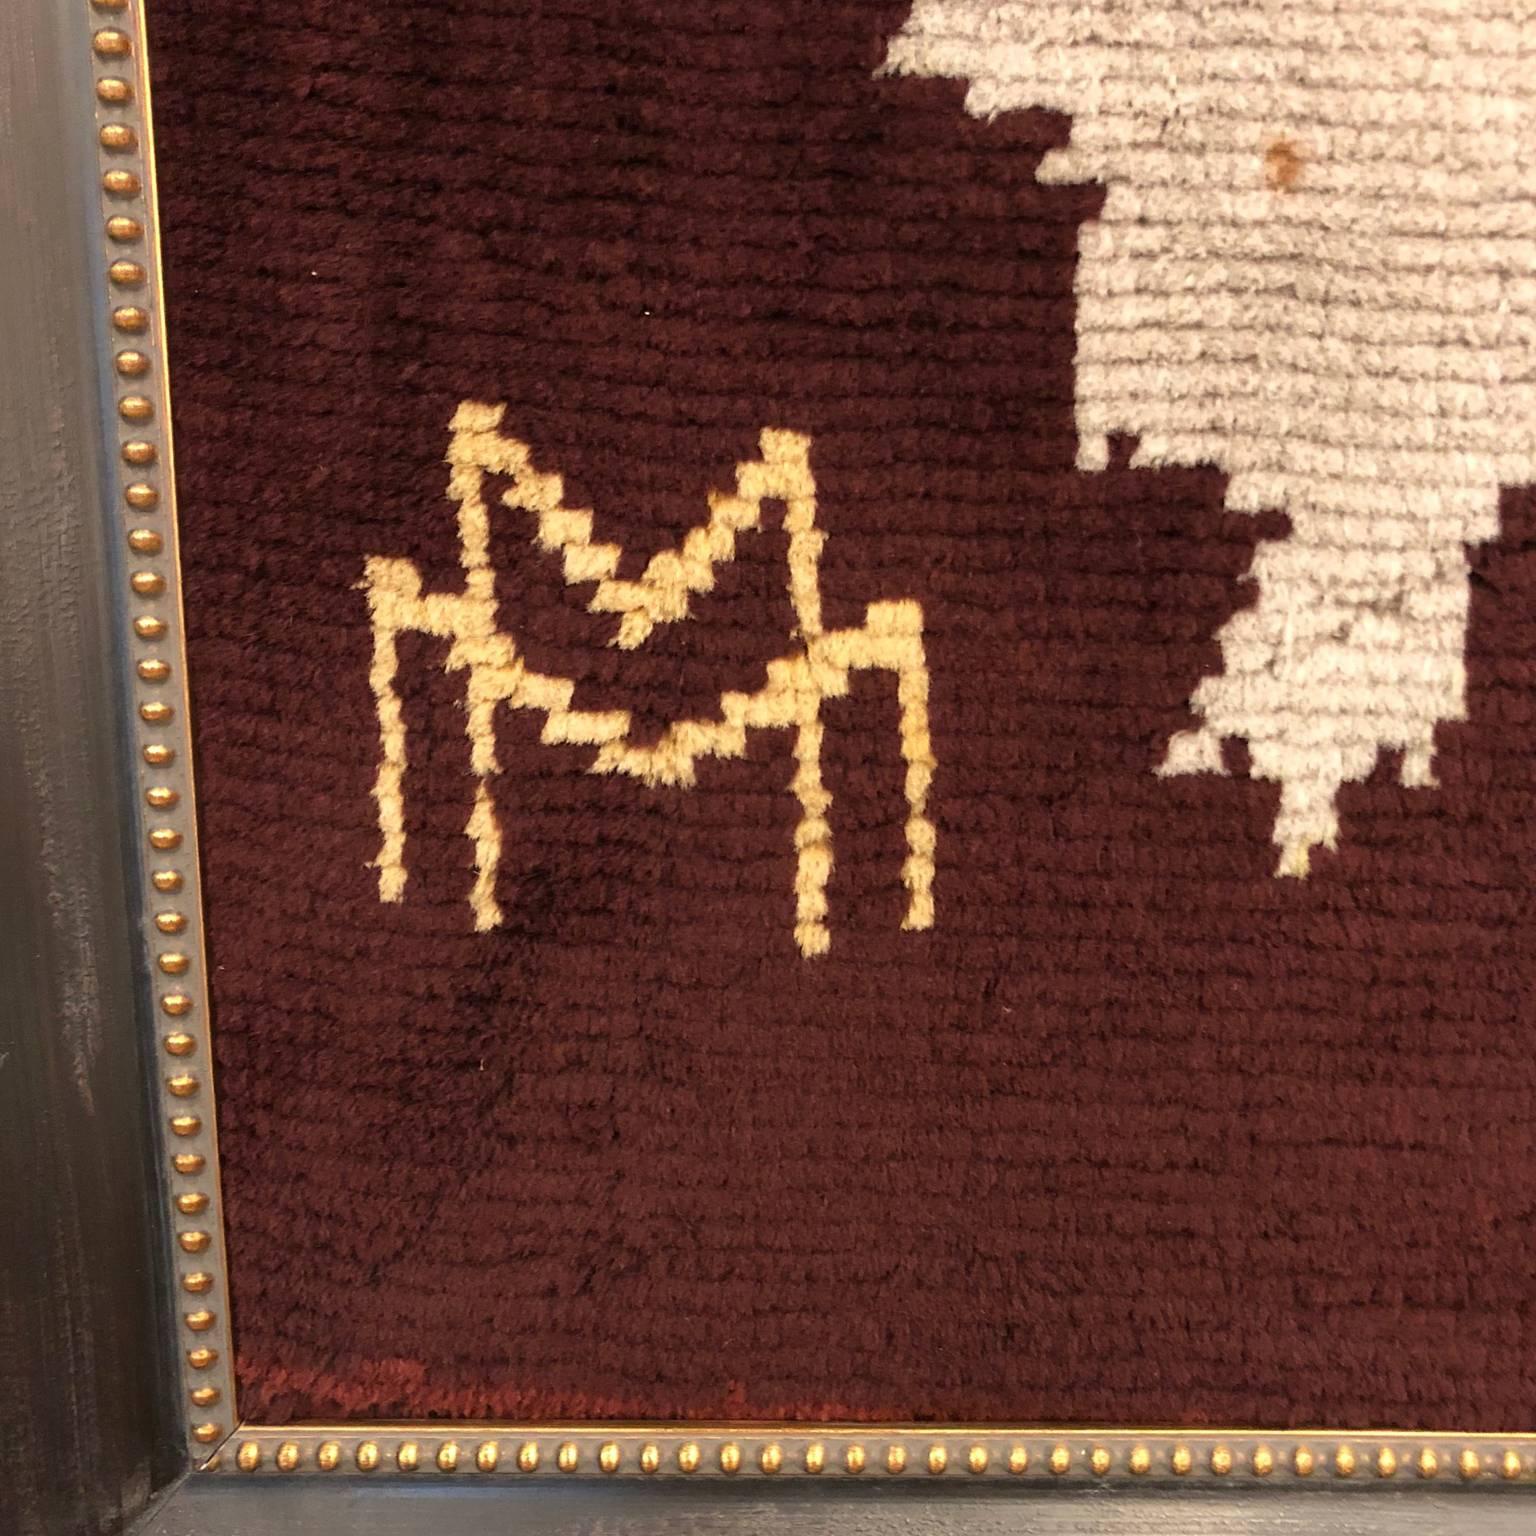 Hand woven wool rug hung as tapestry showing the Earth's continents, with a steamship and palm tree motifs in the corners. 
Newly framed in distressed black wood and gold dotted border

Attributed Maison DIM, Signed 